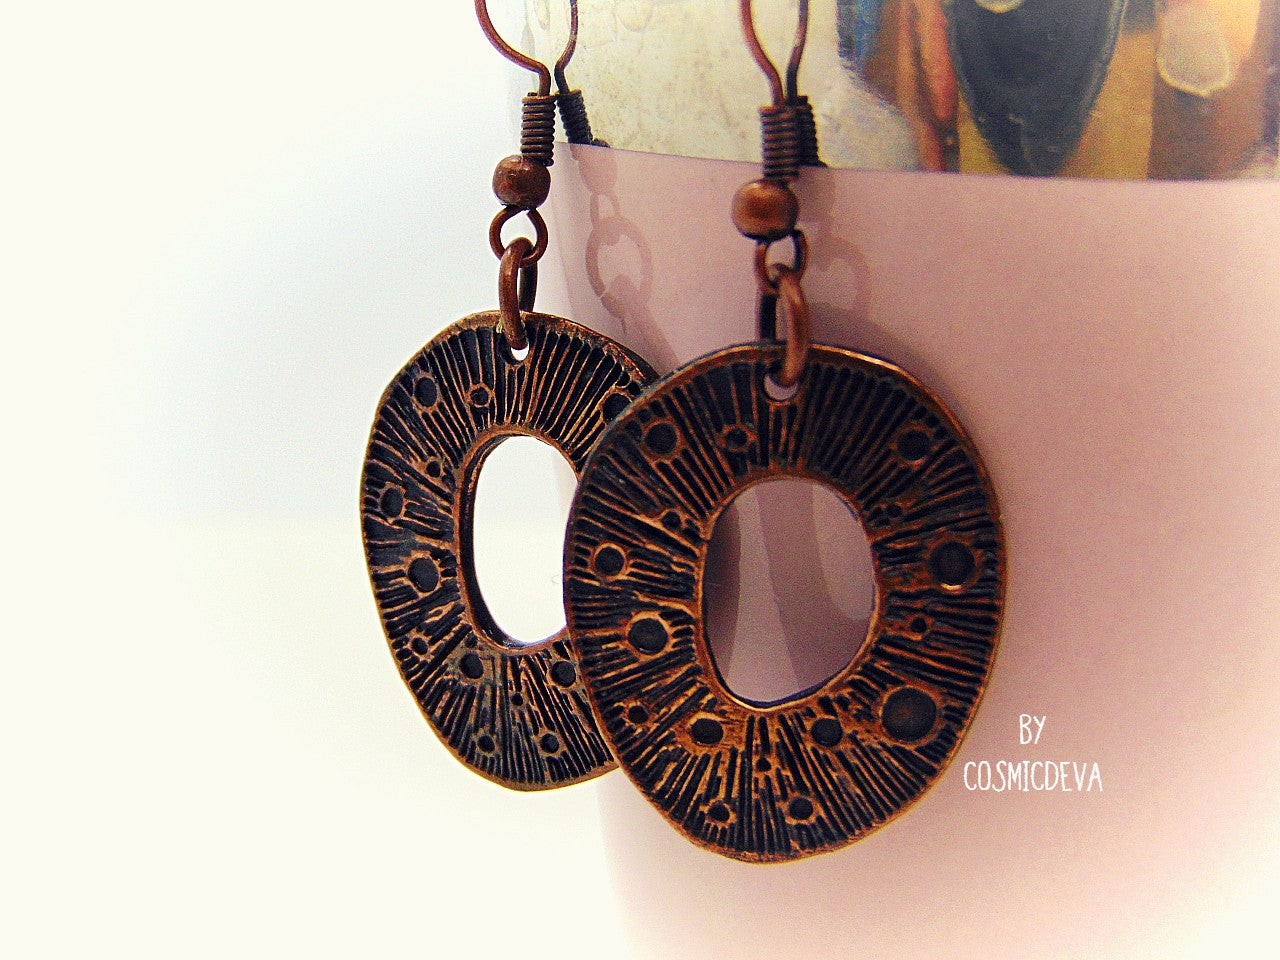 These organic copper dangle earrings are the perfect pick for any season. Handcrafted in the studio, they feature a unique organic texture and warm patinated copper color that can't be found anywhere else. Lightweight and comfortable to wear, no two pairs are ever alike!